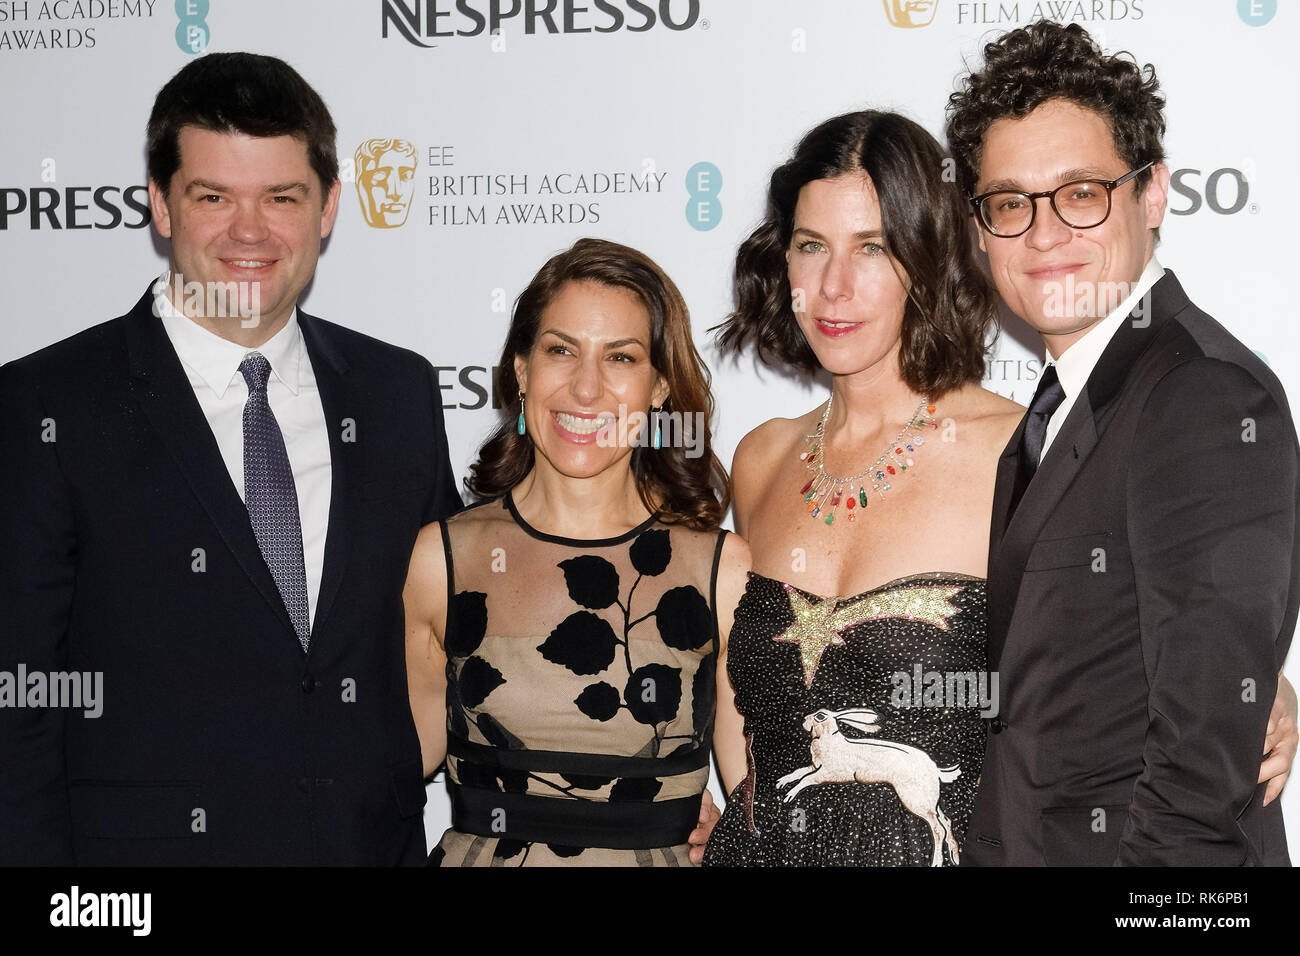 London, UK. Chris Miller and Phil Lord poses at the BAFTA Nespresso Nominees Party on Saturday 9 February 2019 at Kensington Palace, London. . Picture by Julie Edwards. Credit: Julie Edwards/Alamy Live News Stock Photo